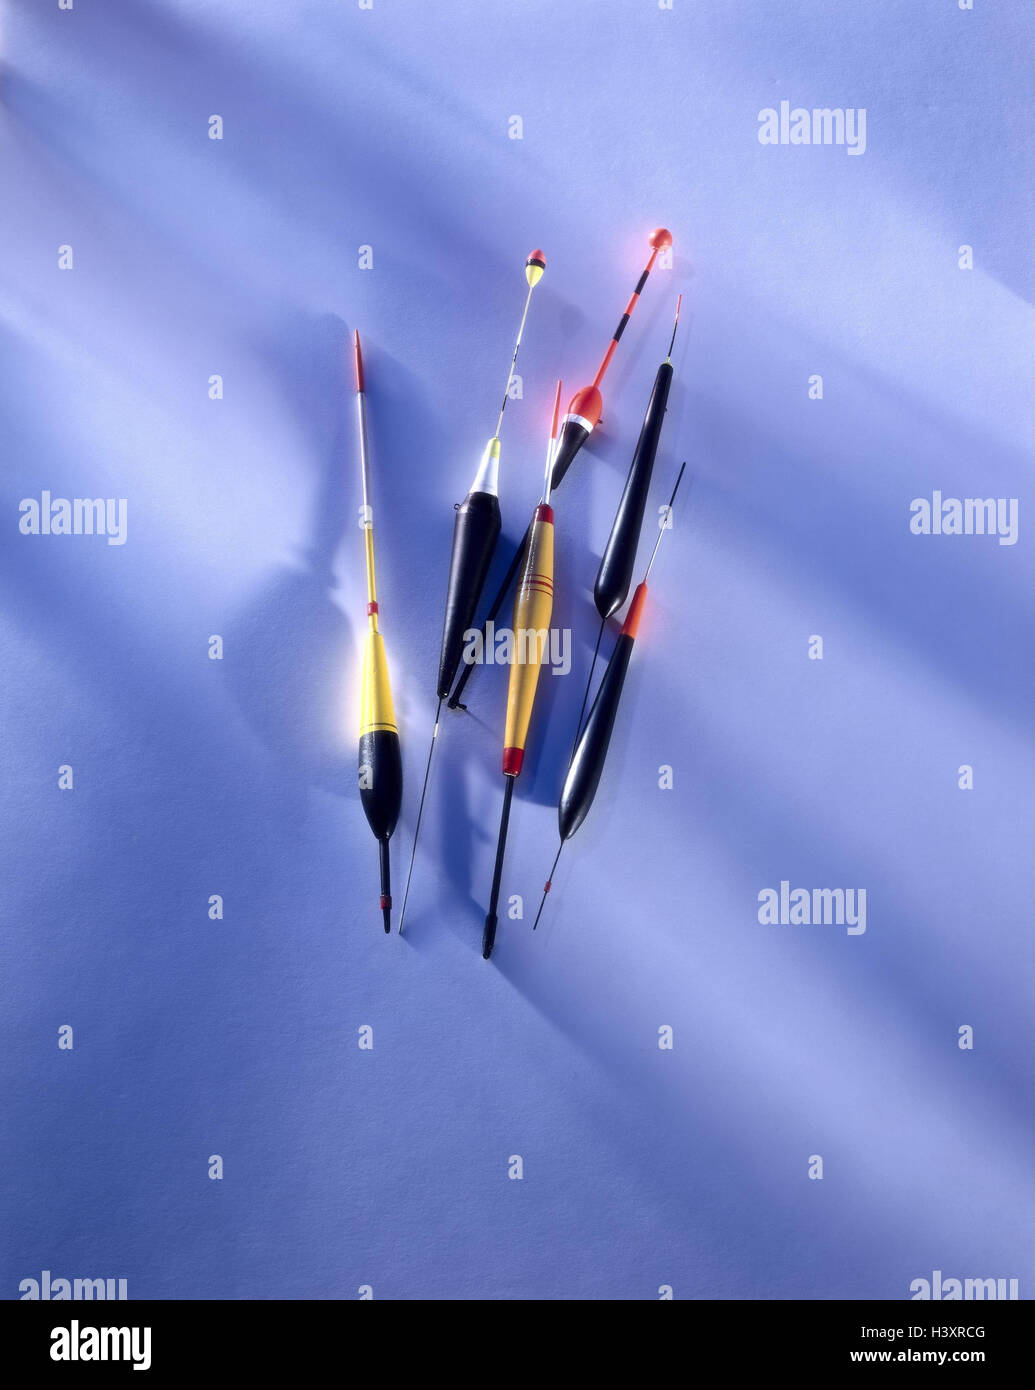 Angling, float, different, leisure time, sport, sports angling, hobby, activity, amusement, bite indicator, bite indicator, colours, forms, passed away, product photography, Still life, studio Stock Photo